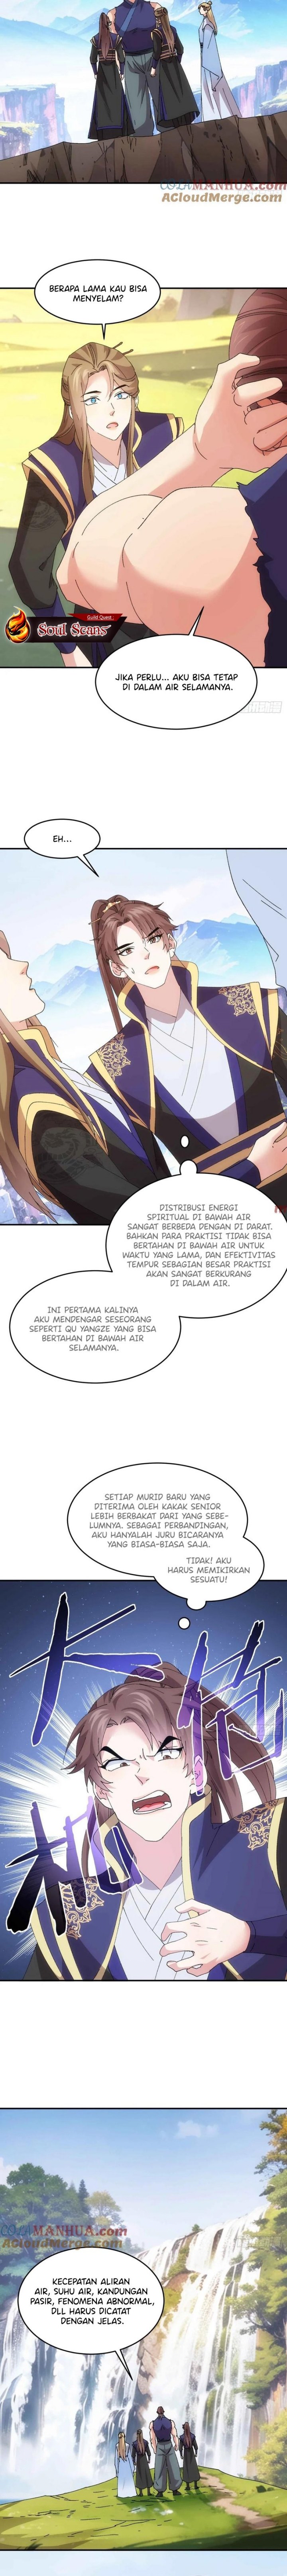 Dilarang COPAS - situs resmi www.mangacanblog.com - Komik i just dont play the card according to the routine 210 - chapter 210 211 Indonesia i just dont play the card according to the routine 210 - chapter 210 Terbaru 2|Baca Manga Komik Indonesia|Mangacan